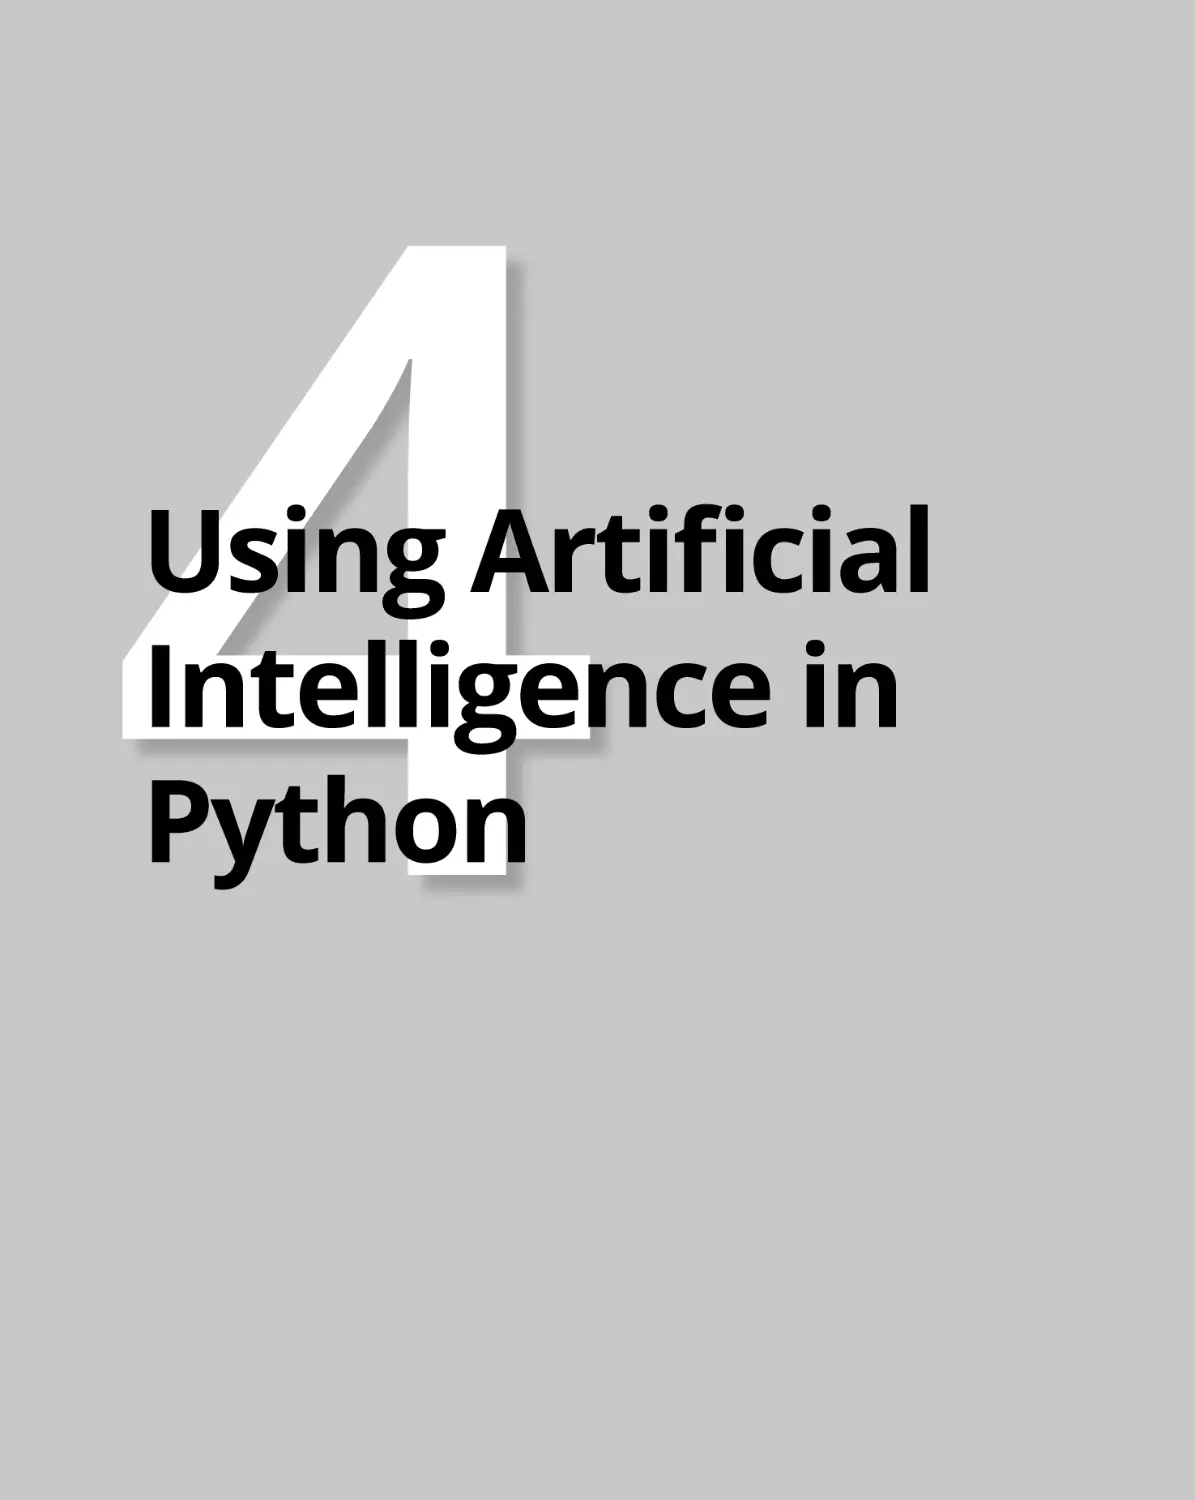 Book
4 Using Artificial Intelligence in Python